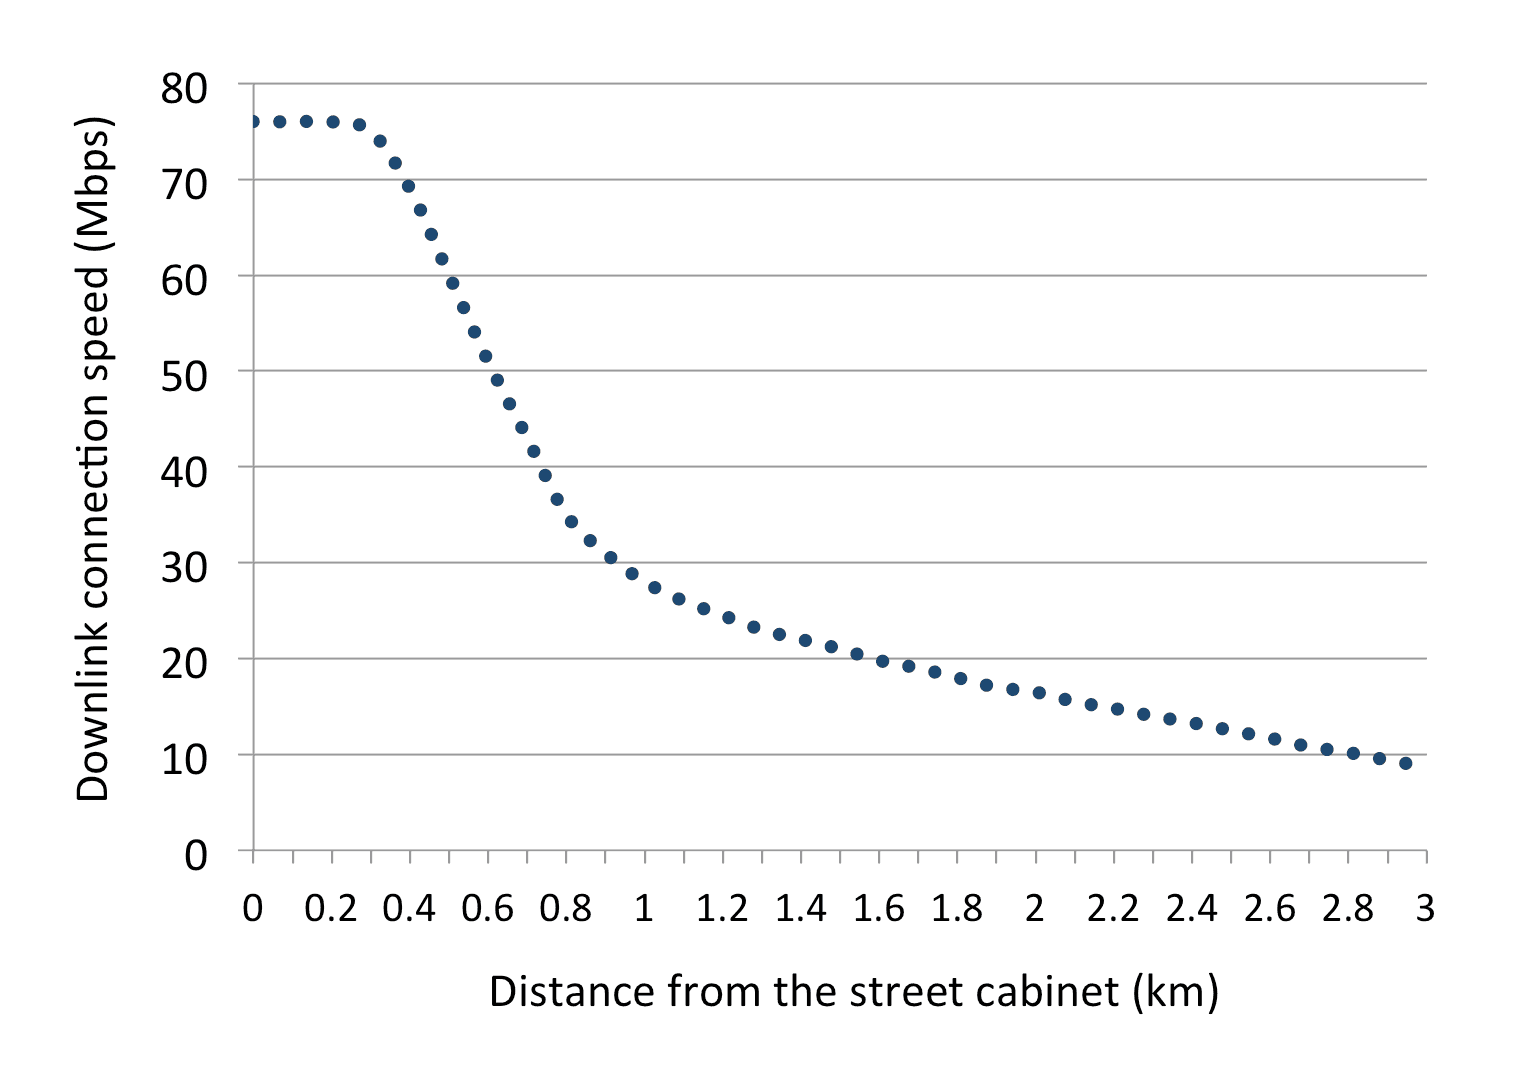 Graph of downlink connection speed against distance from the street cabinet